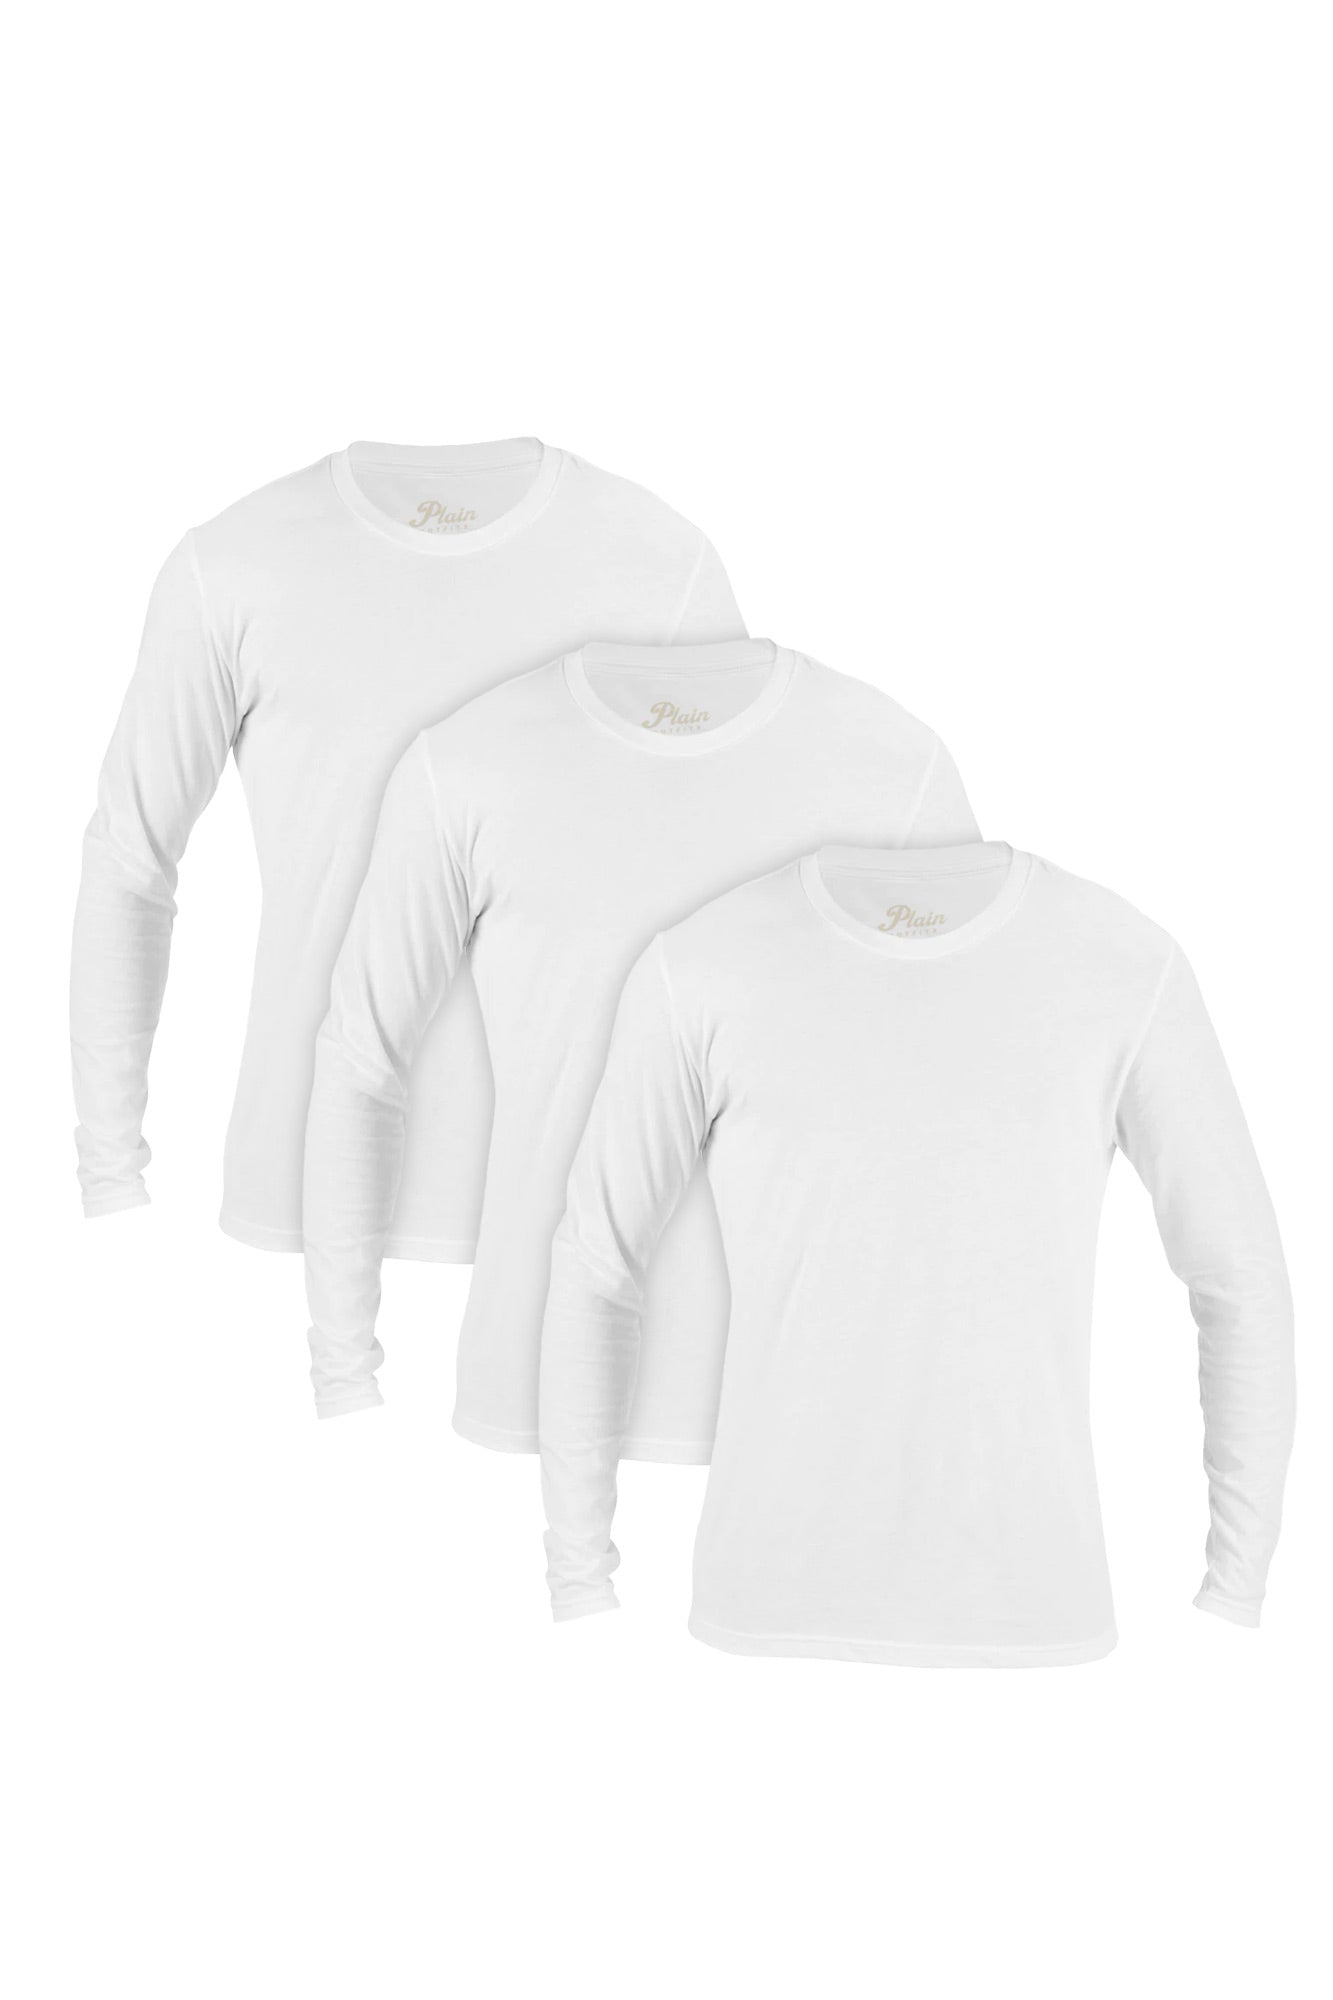 The White Long Sleeve 3-Pack